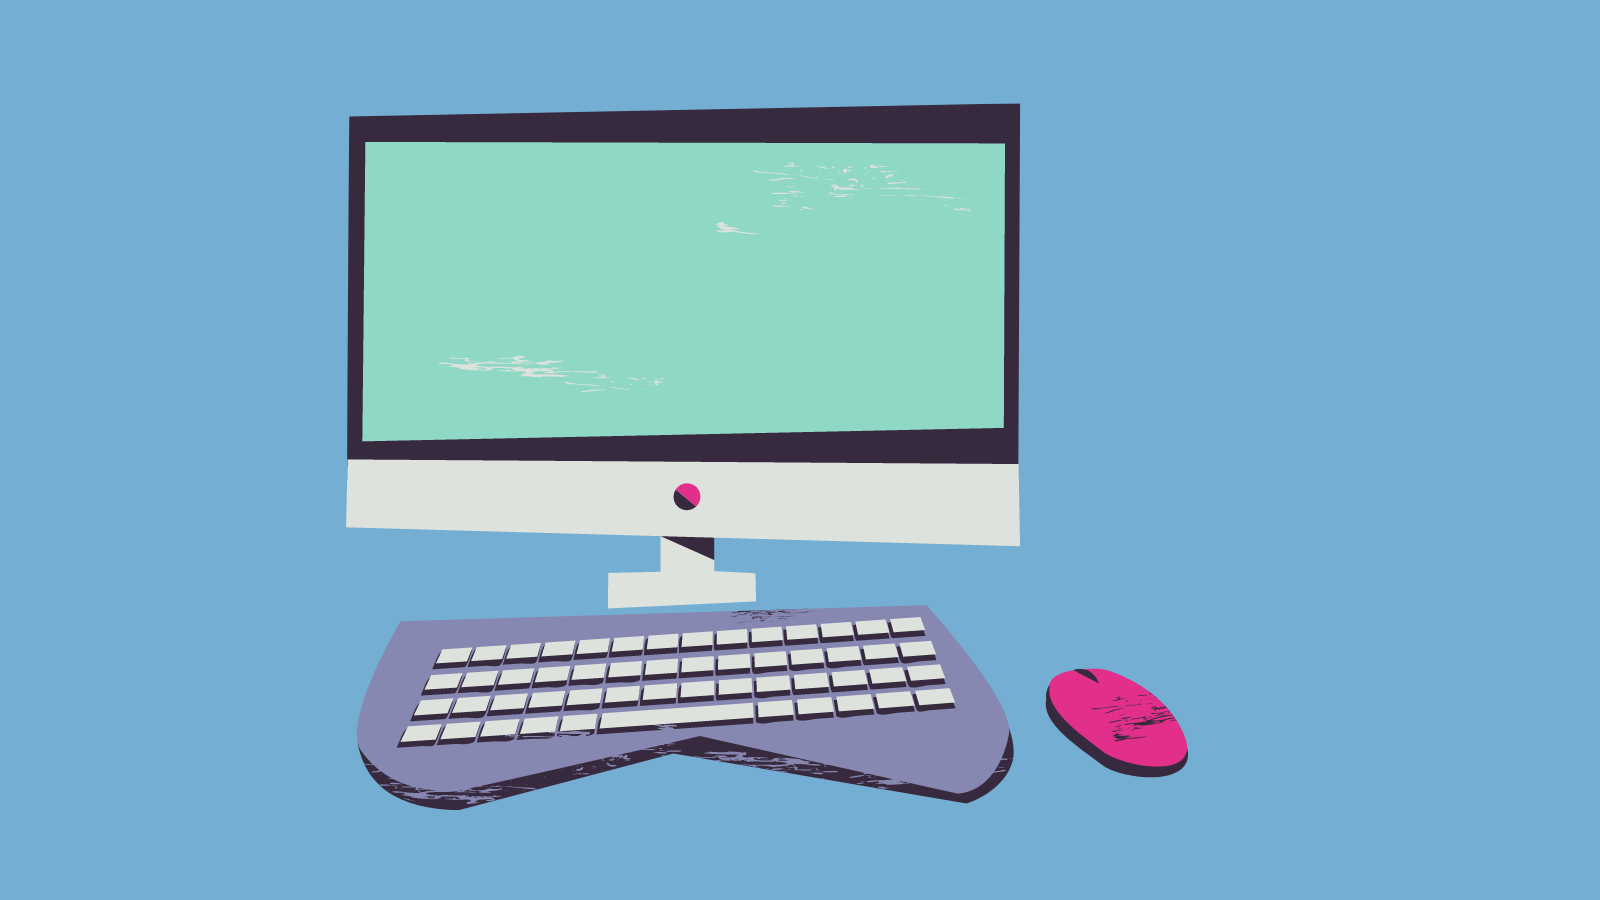 A desktop computer with a funky keyboard and mouse